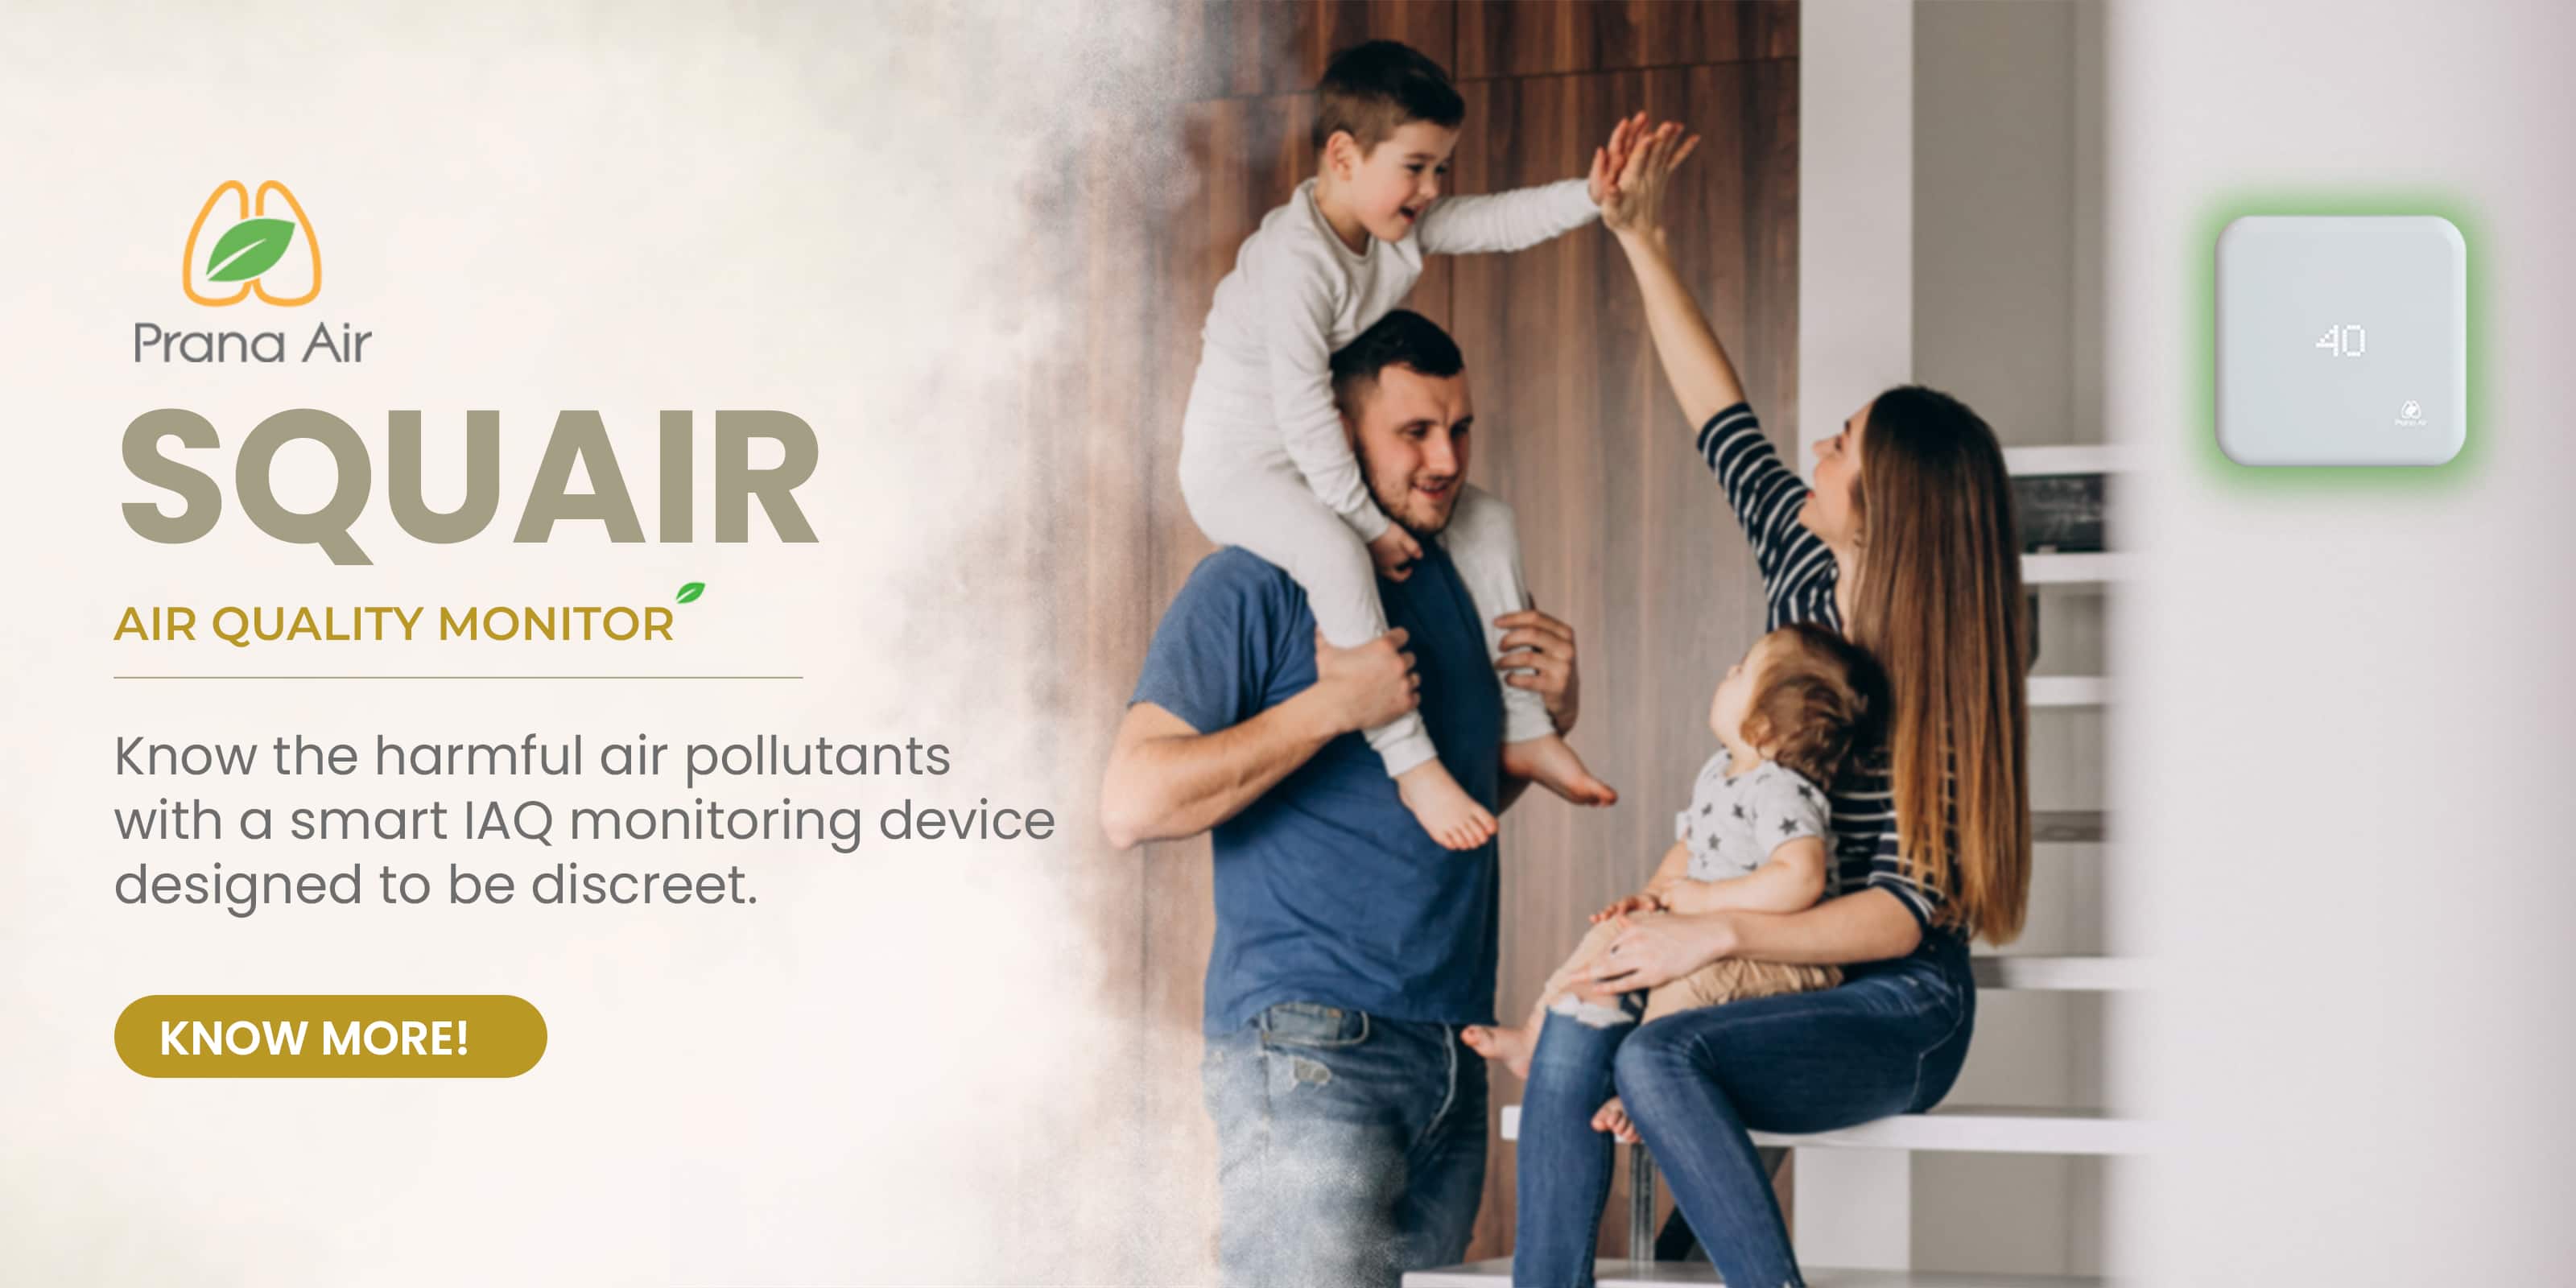 prana air squair indoor air quality monitor for West Bengal